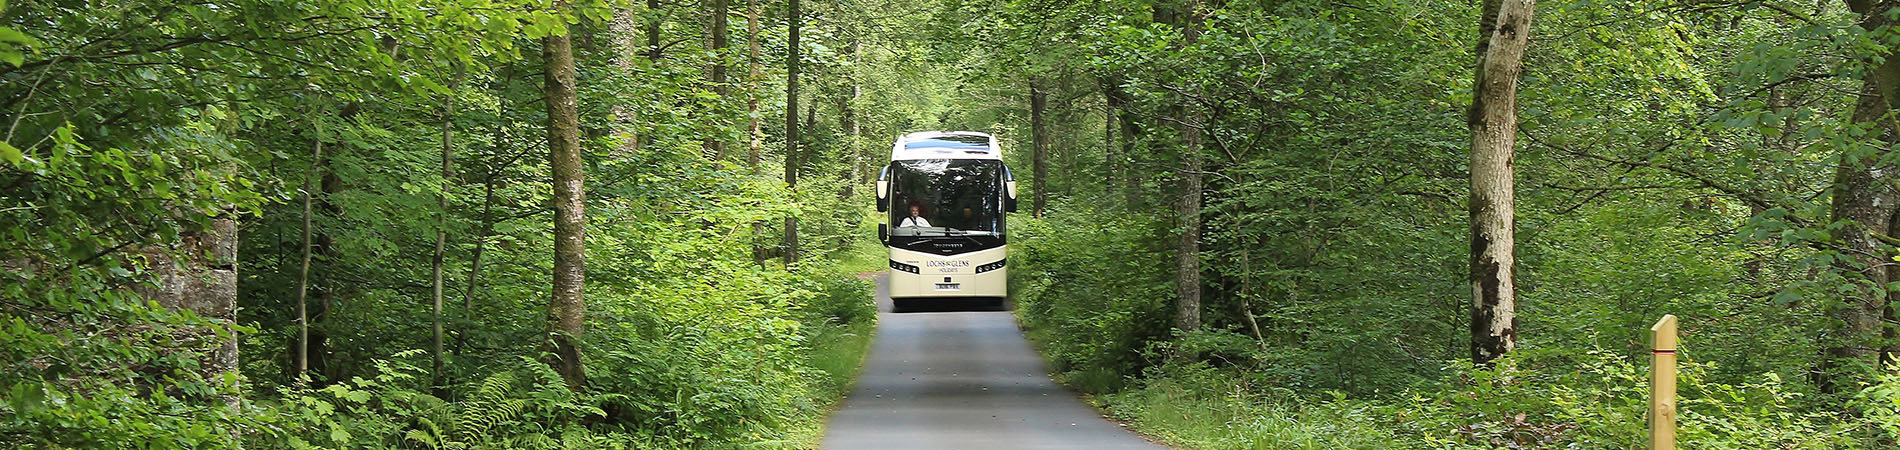 Lochs and Glens coach holidays offers day trips from Ardgartan Hotel in Arrochar.